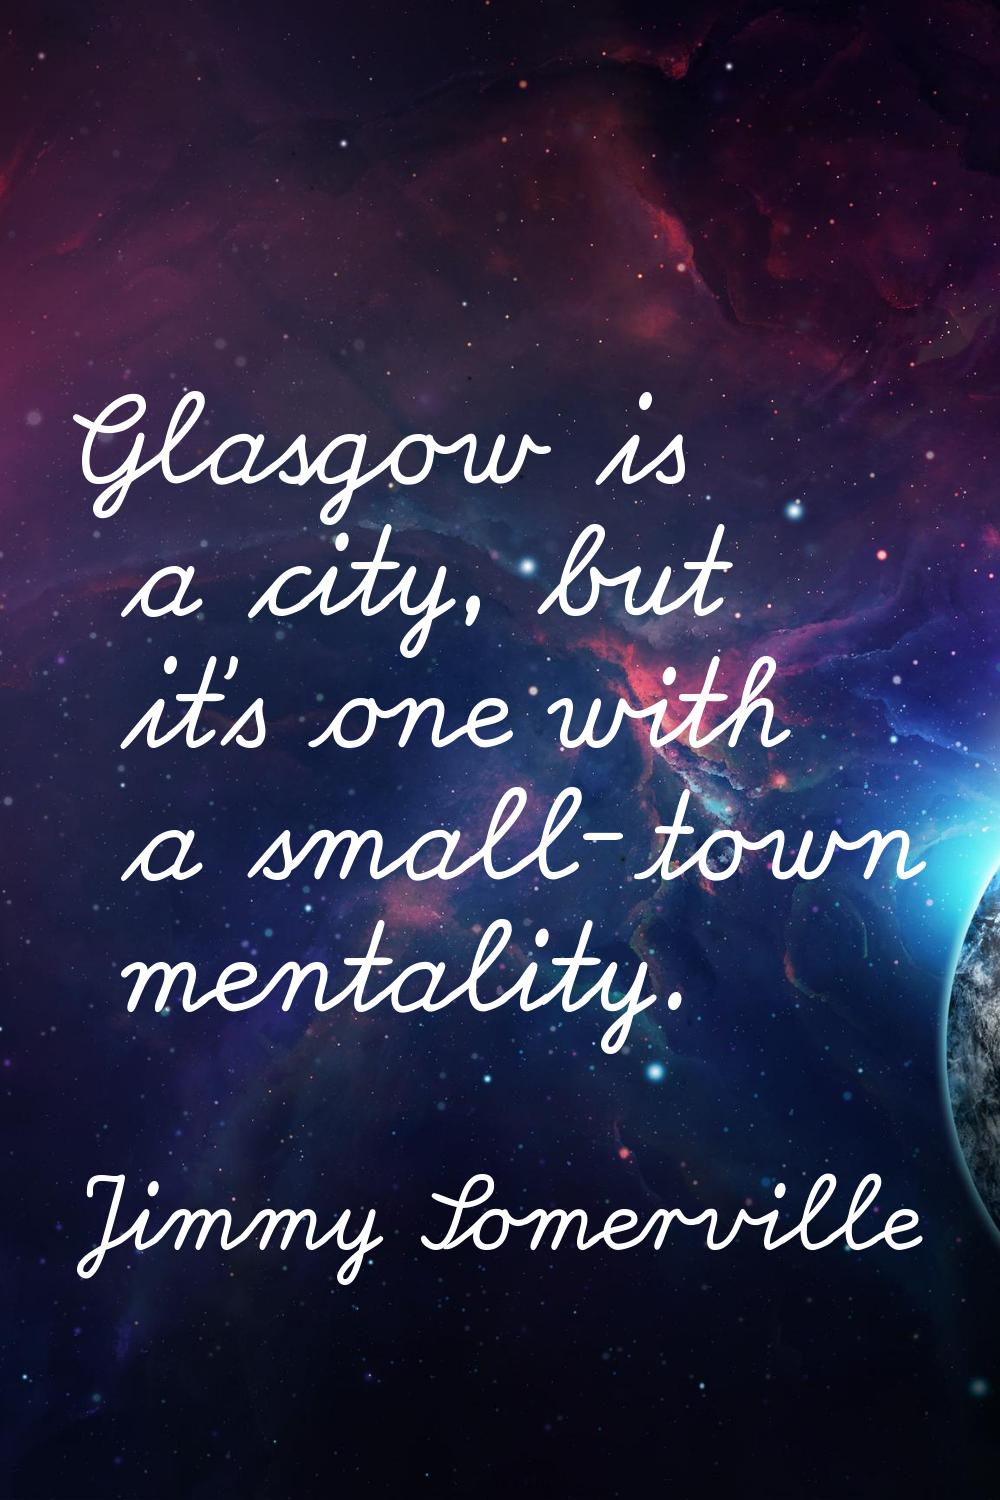 Glasgow is a city, but it's one with a small-town mentality.